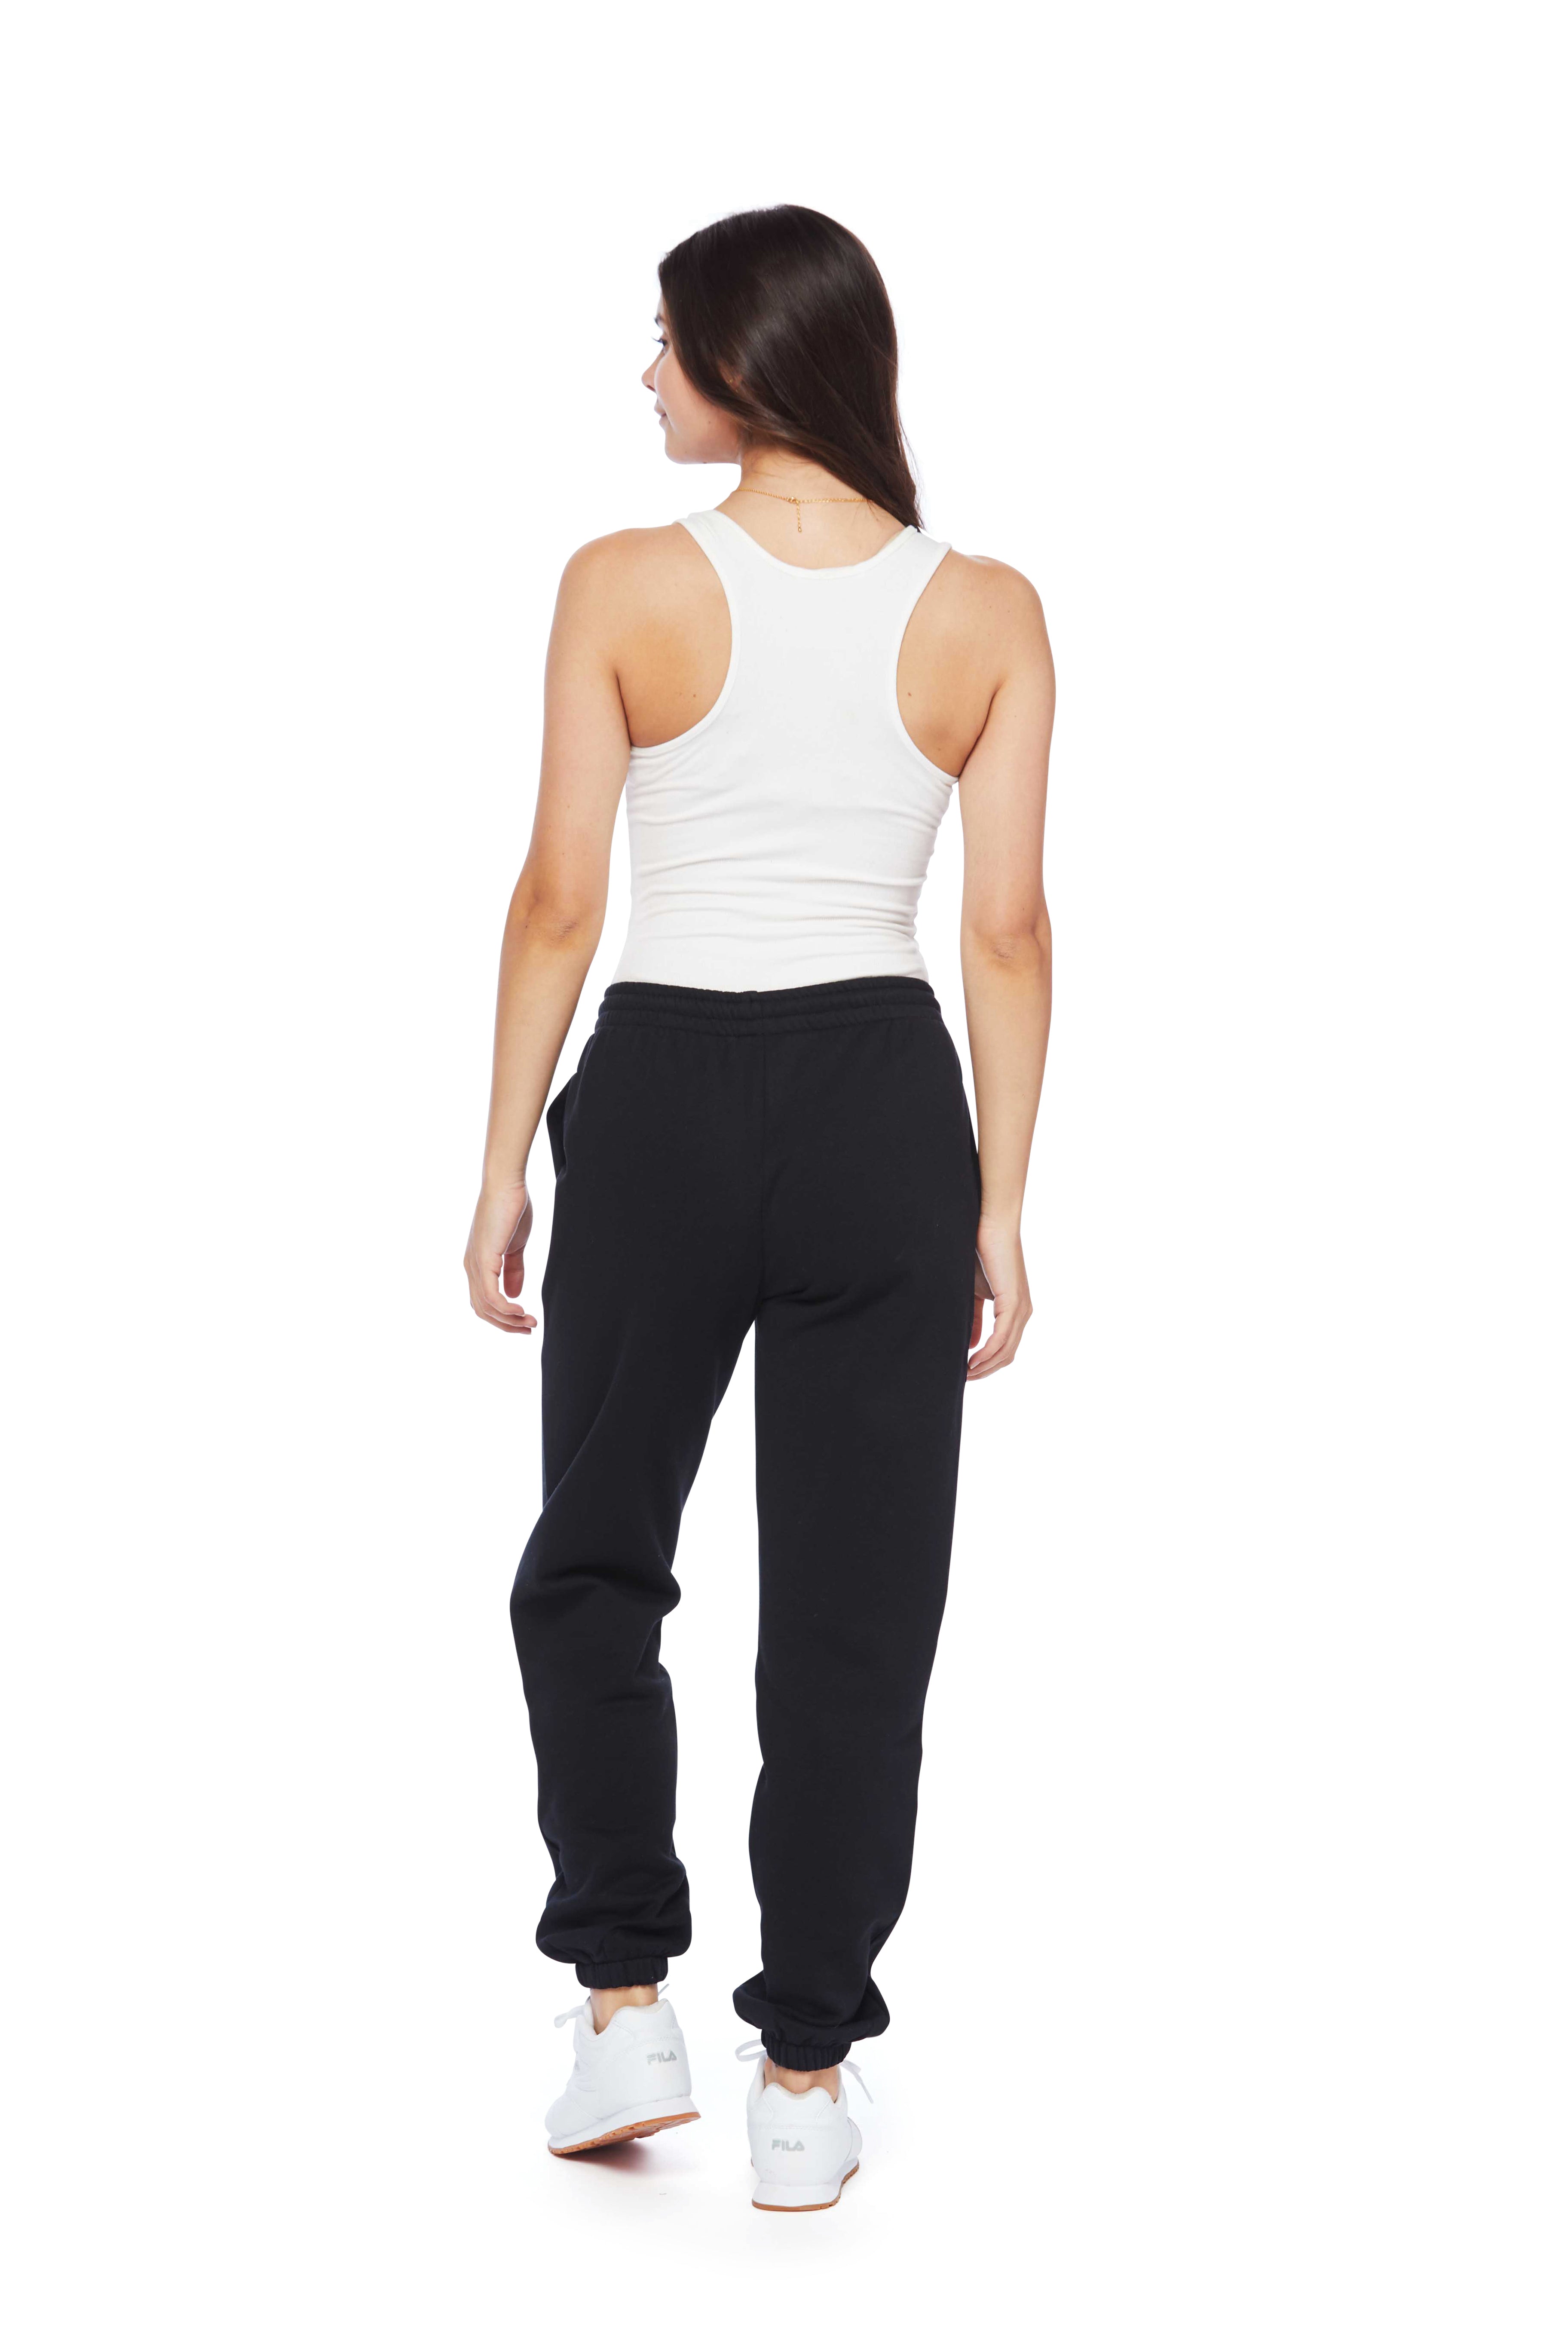 Nova Boyfriend Jogger in Black from Lazypants - always a great buy at a reasonable price.